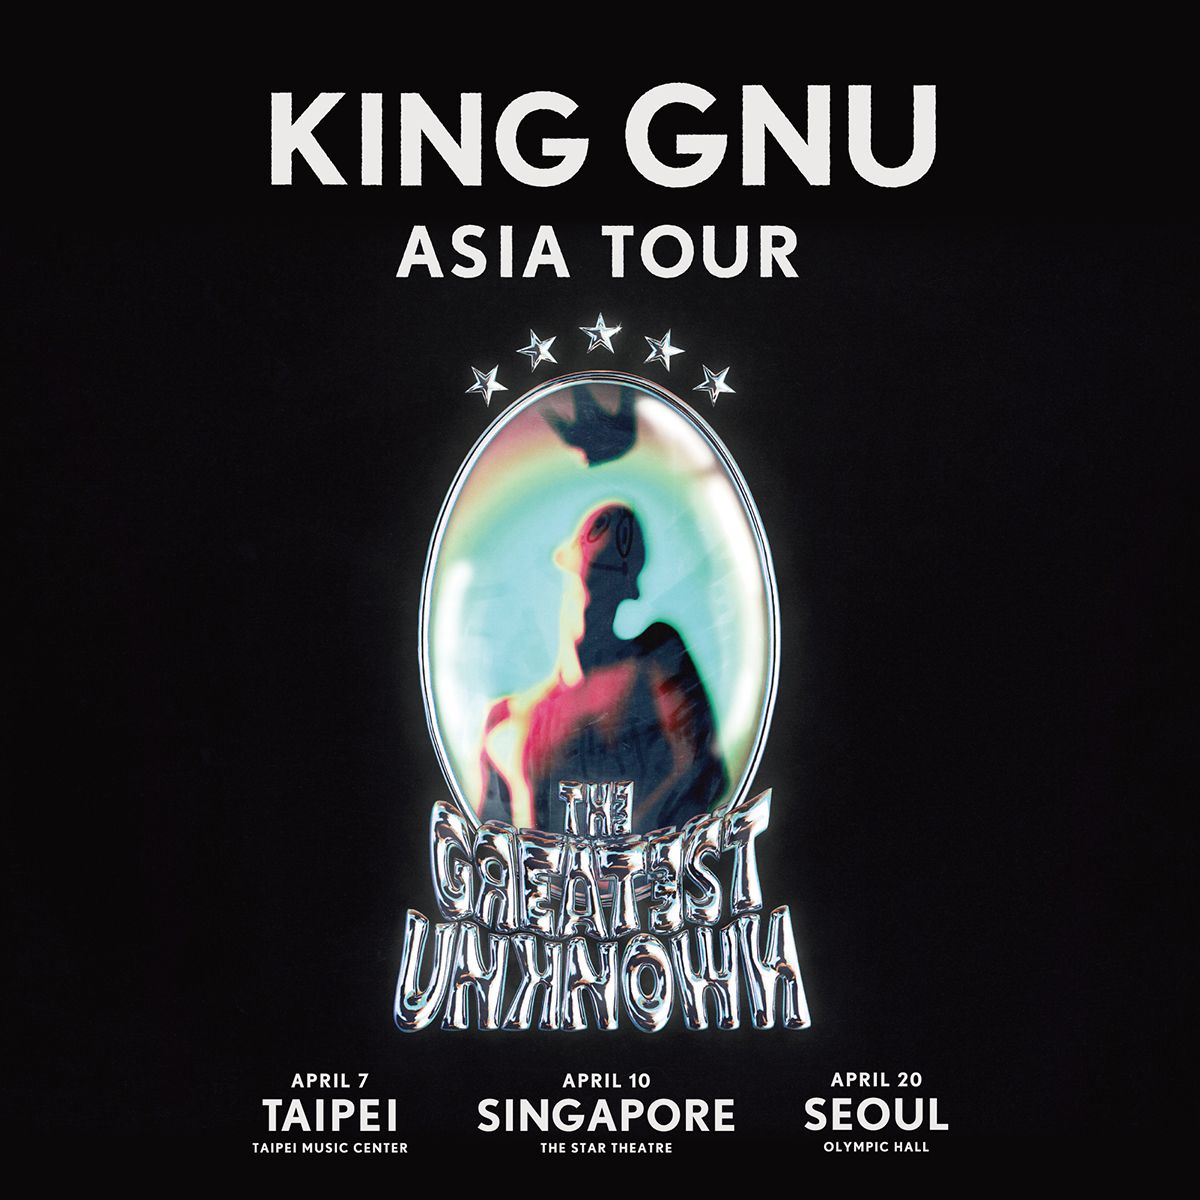 King Gnu Asia Tour 「THE GREATEST UNKNOWN」“、オフィシャルファン 